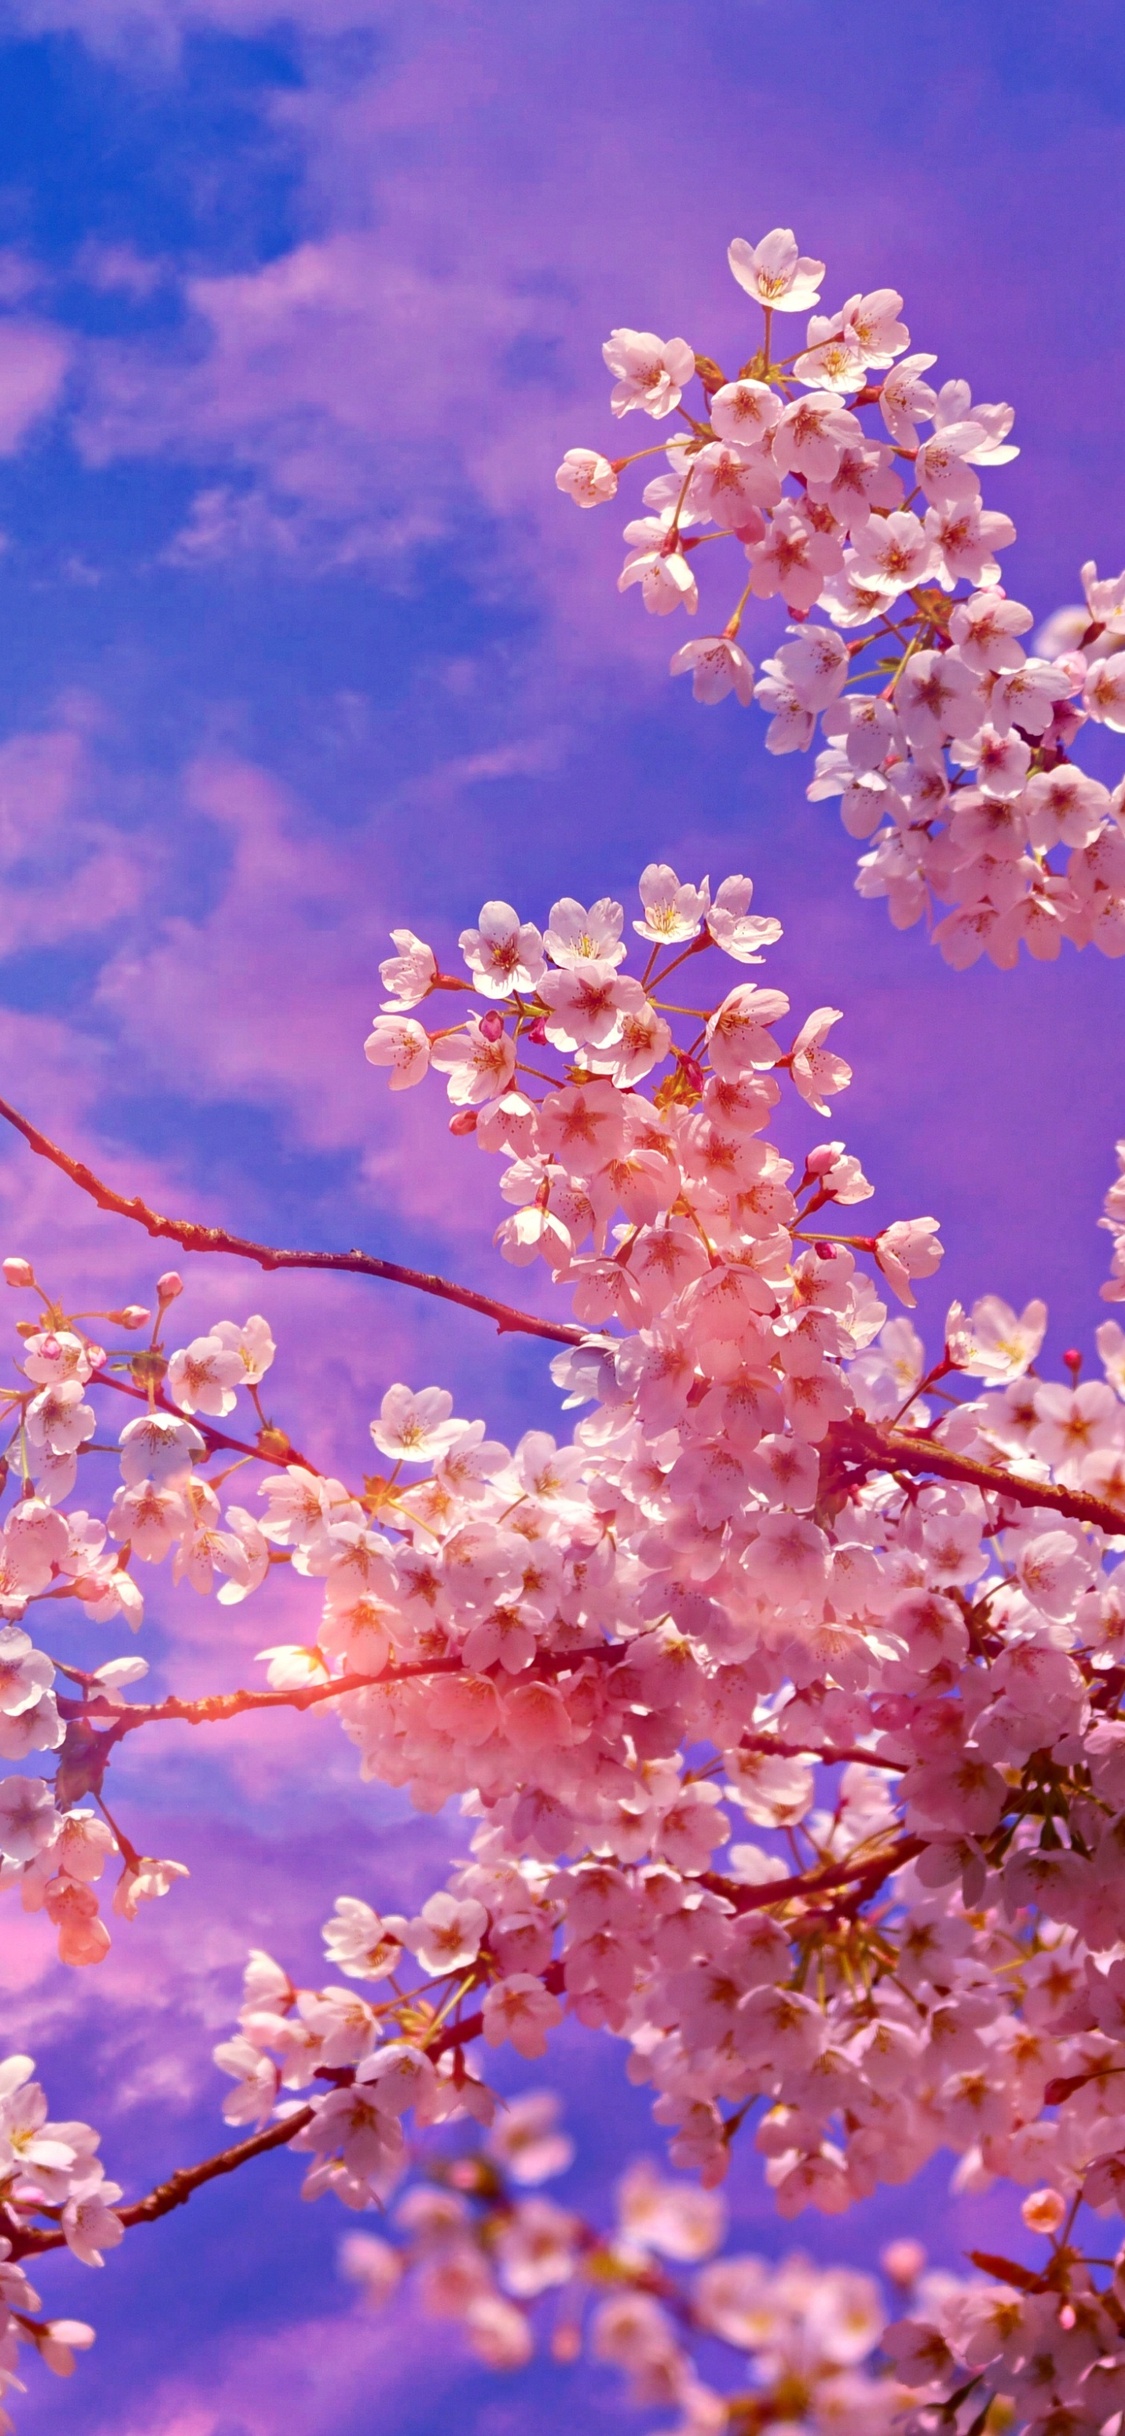 Cherry Blossom Tree 4k 5k iPhone XS, iPhone iPhone X HD 4k Wallpaper, Image, Background, Photo and Picture